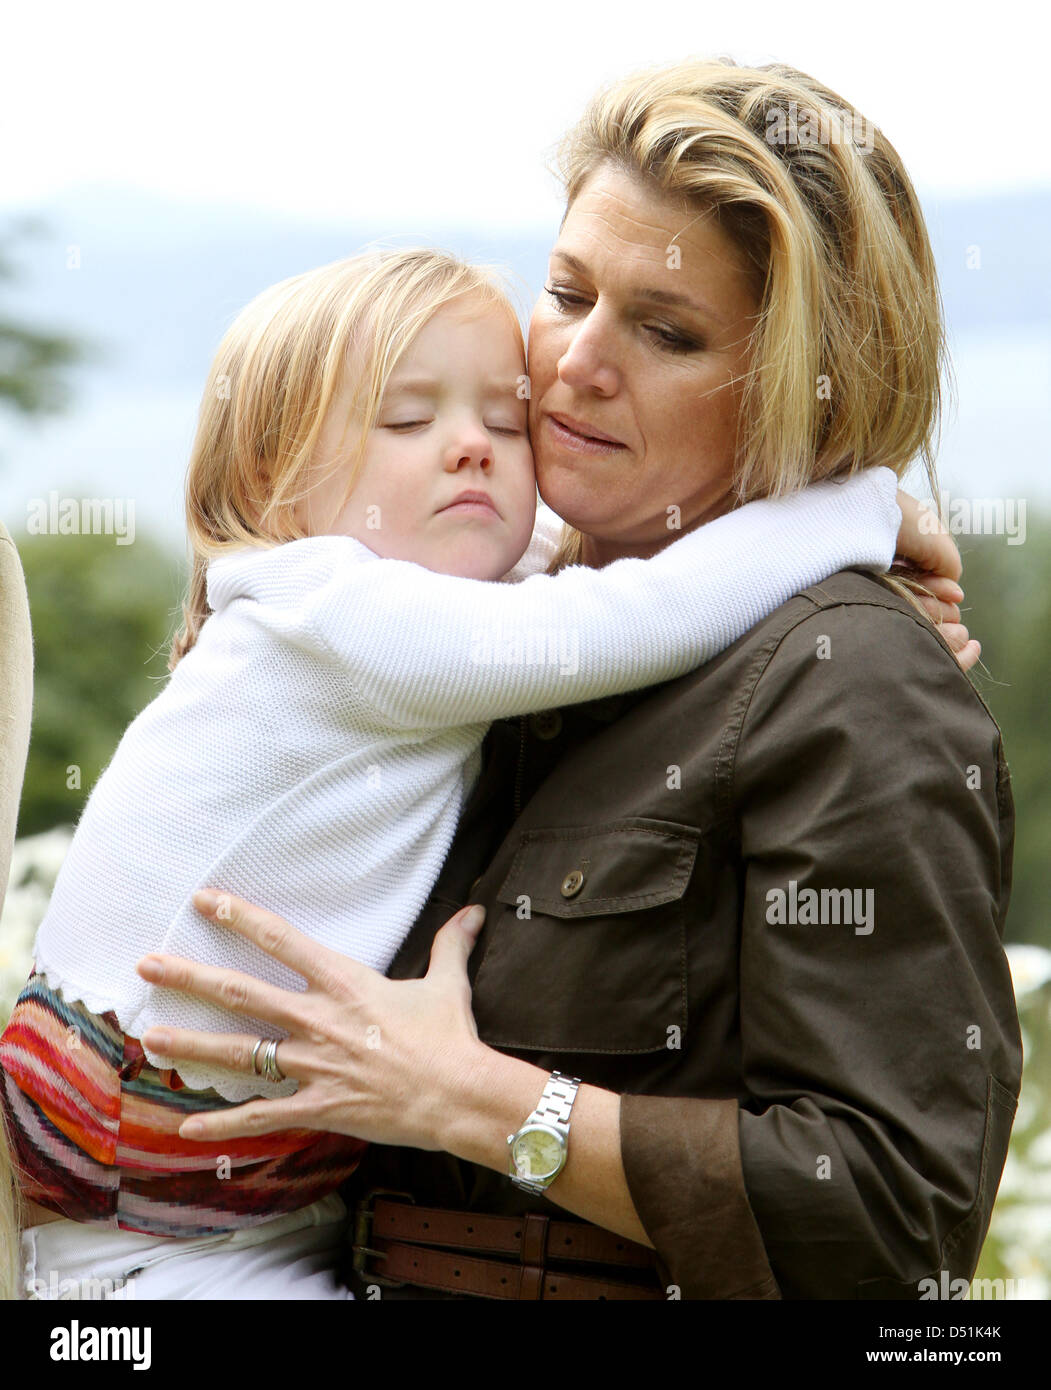 dutch-crown-princess-maxima-with-her-youngest-daughter-ariane-during-D51K4K.jpg